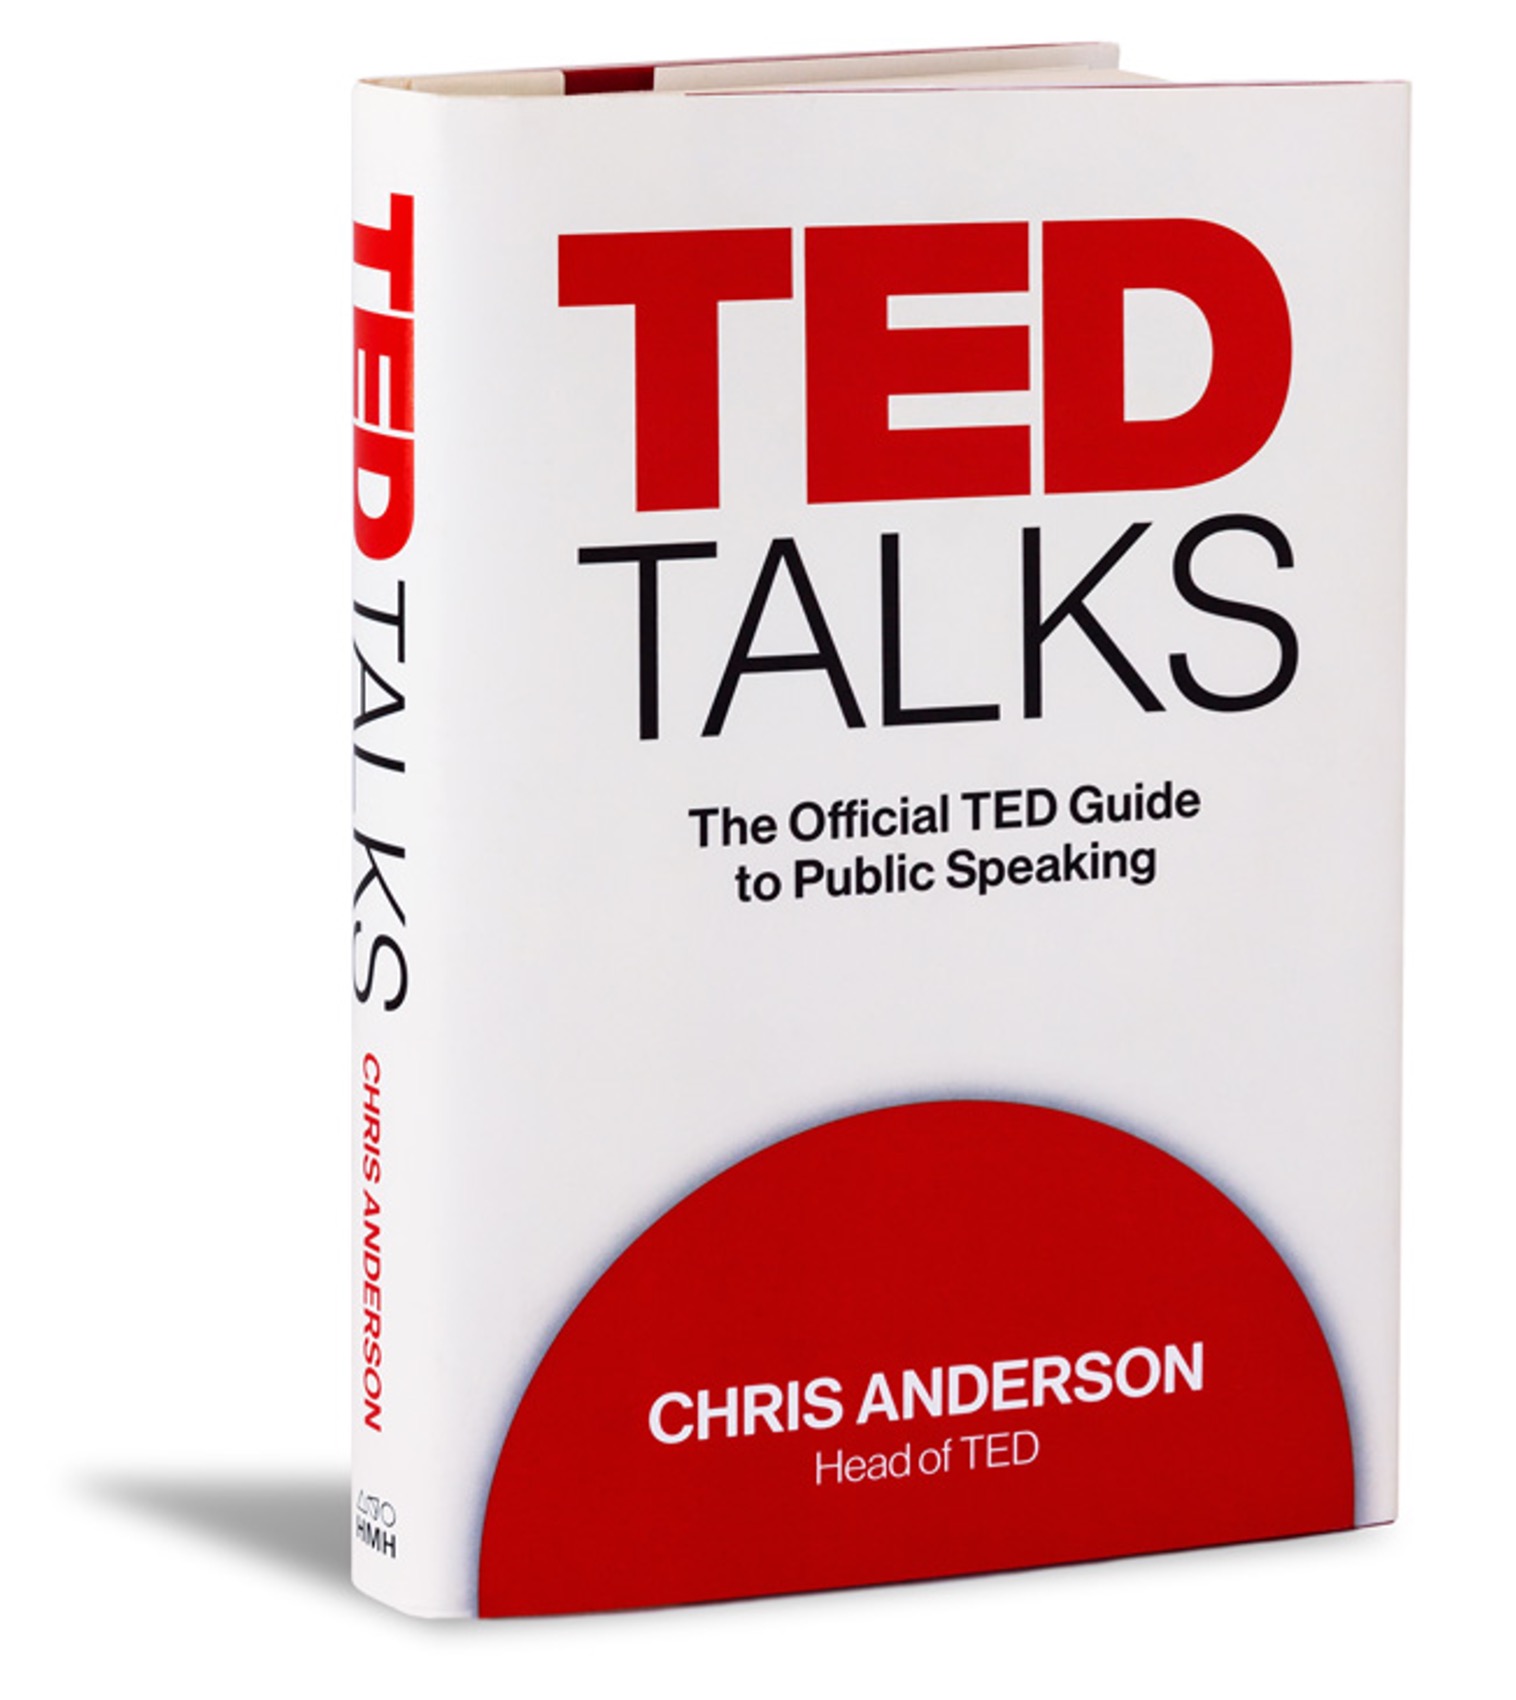 TED Talks. The Offical TED Guide to Public Speaking, Chris Anderson, 2016